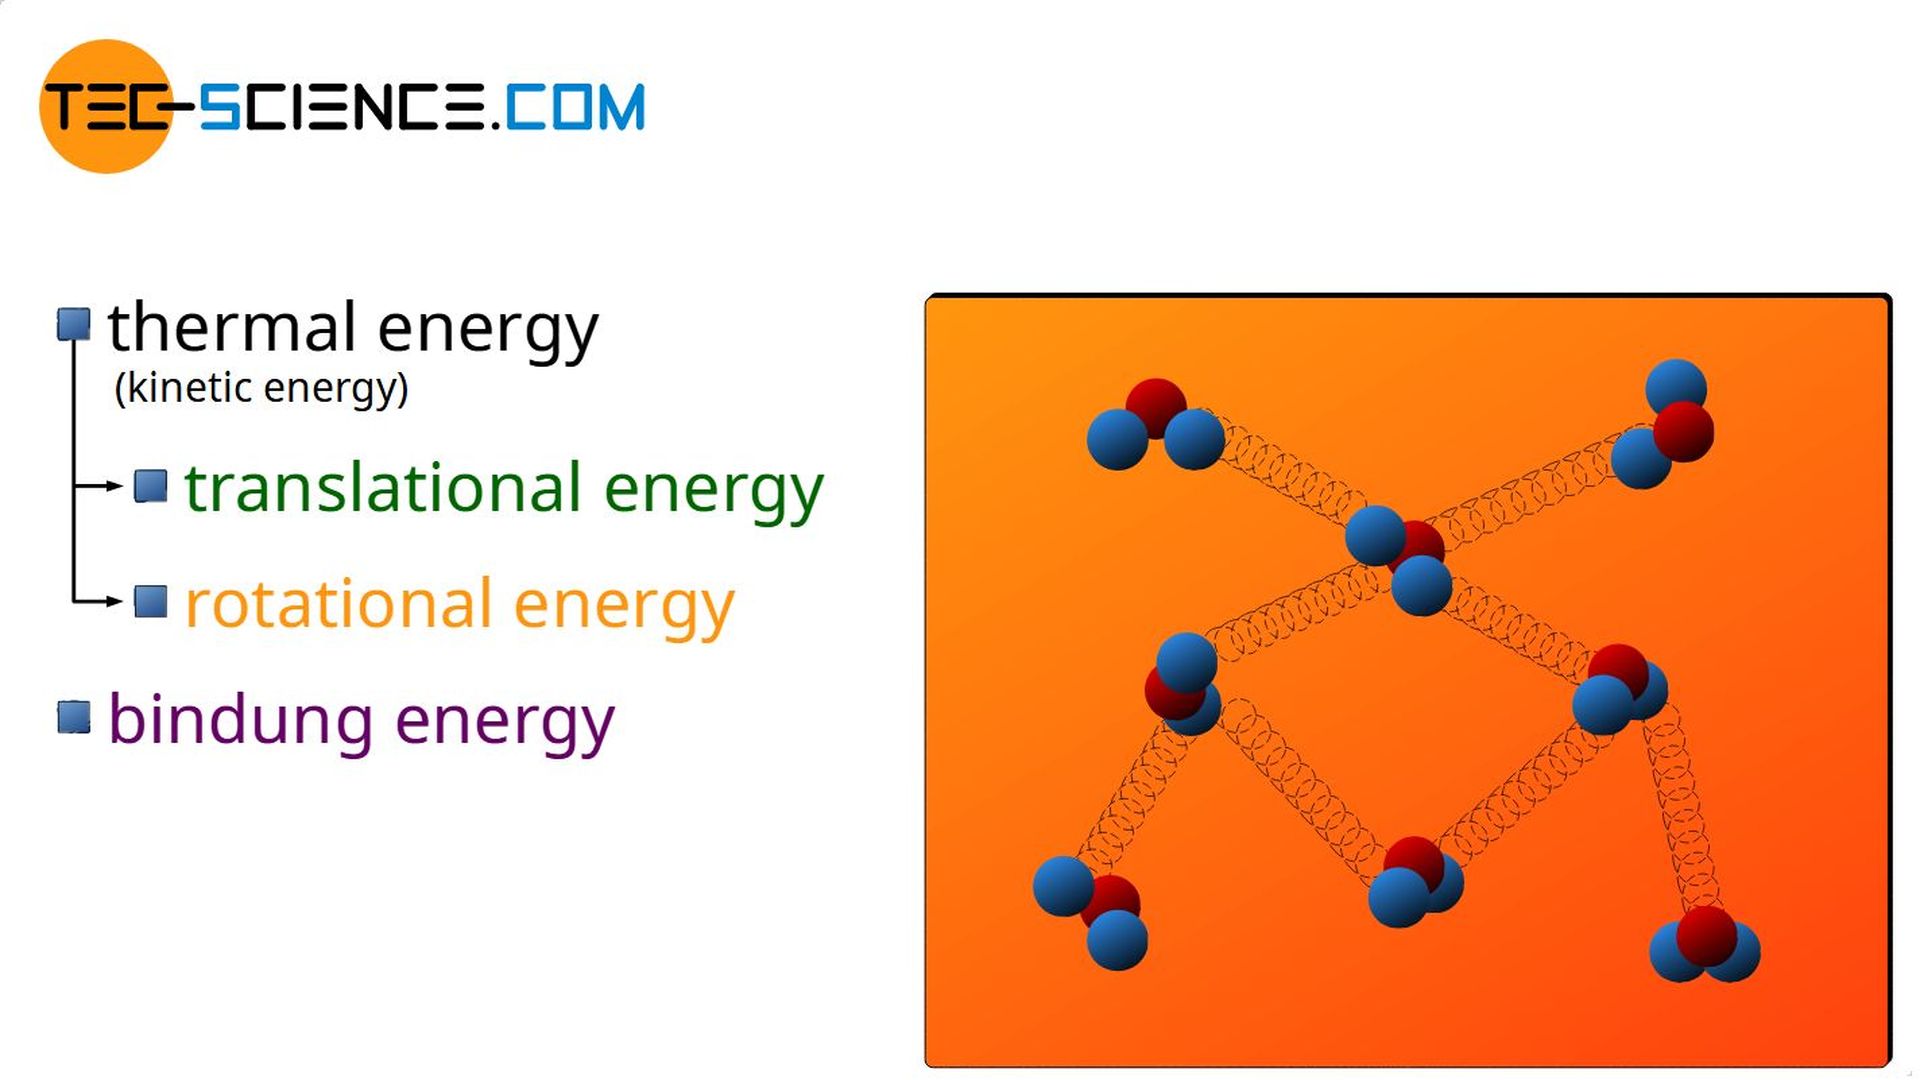 Binding energy as part of the internal energy of a substance